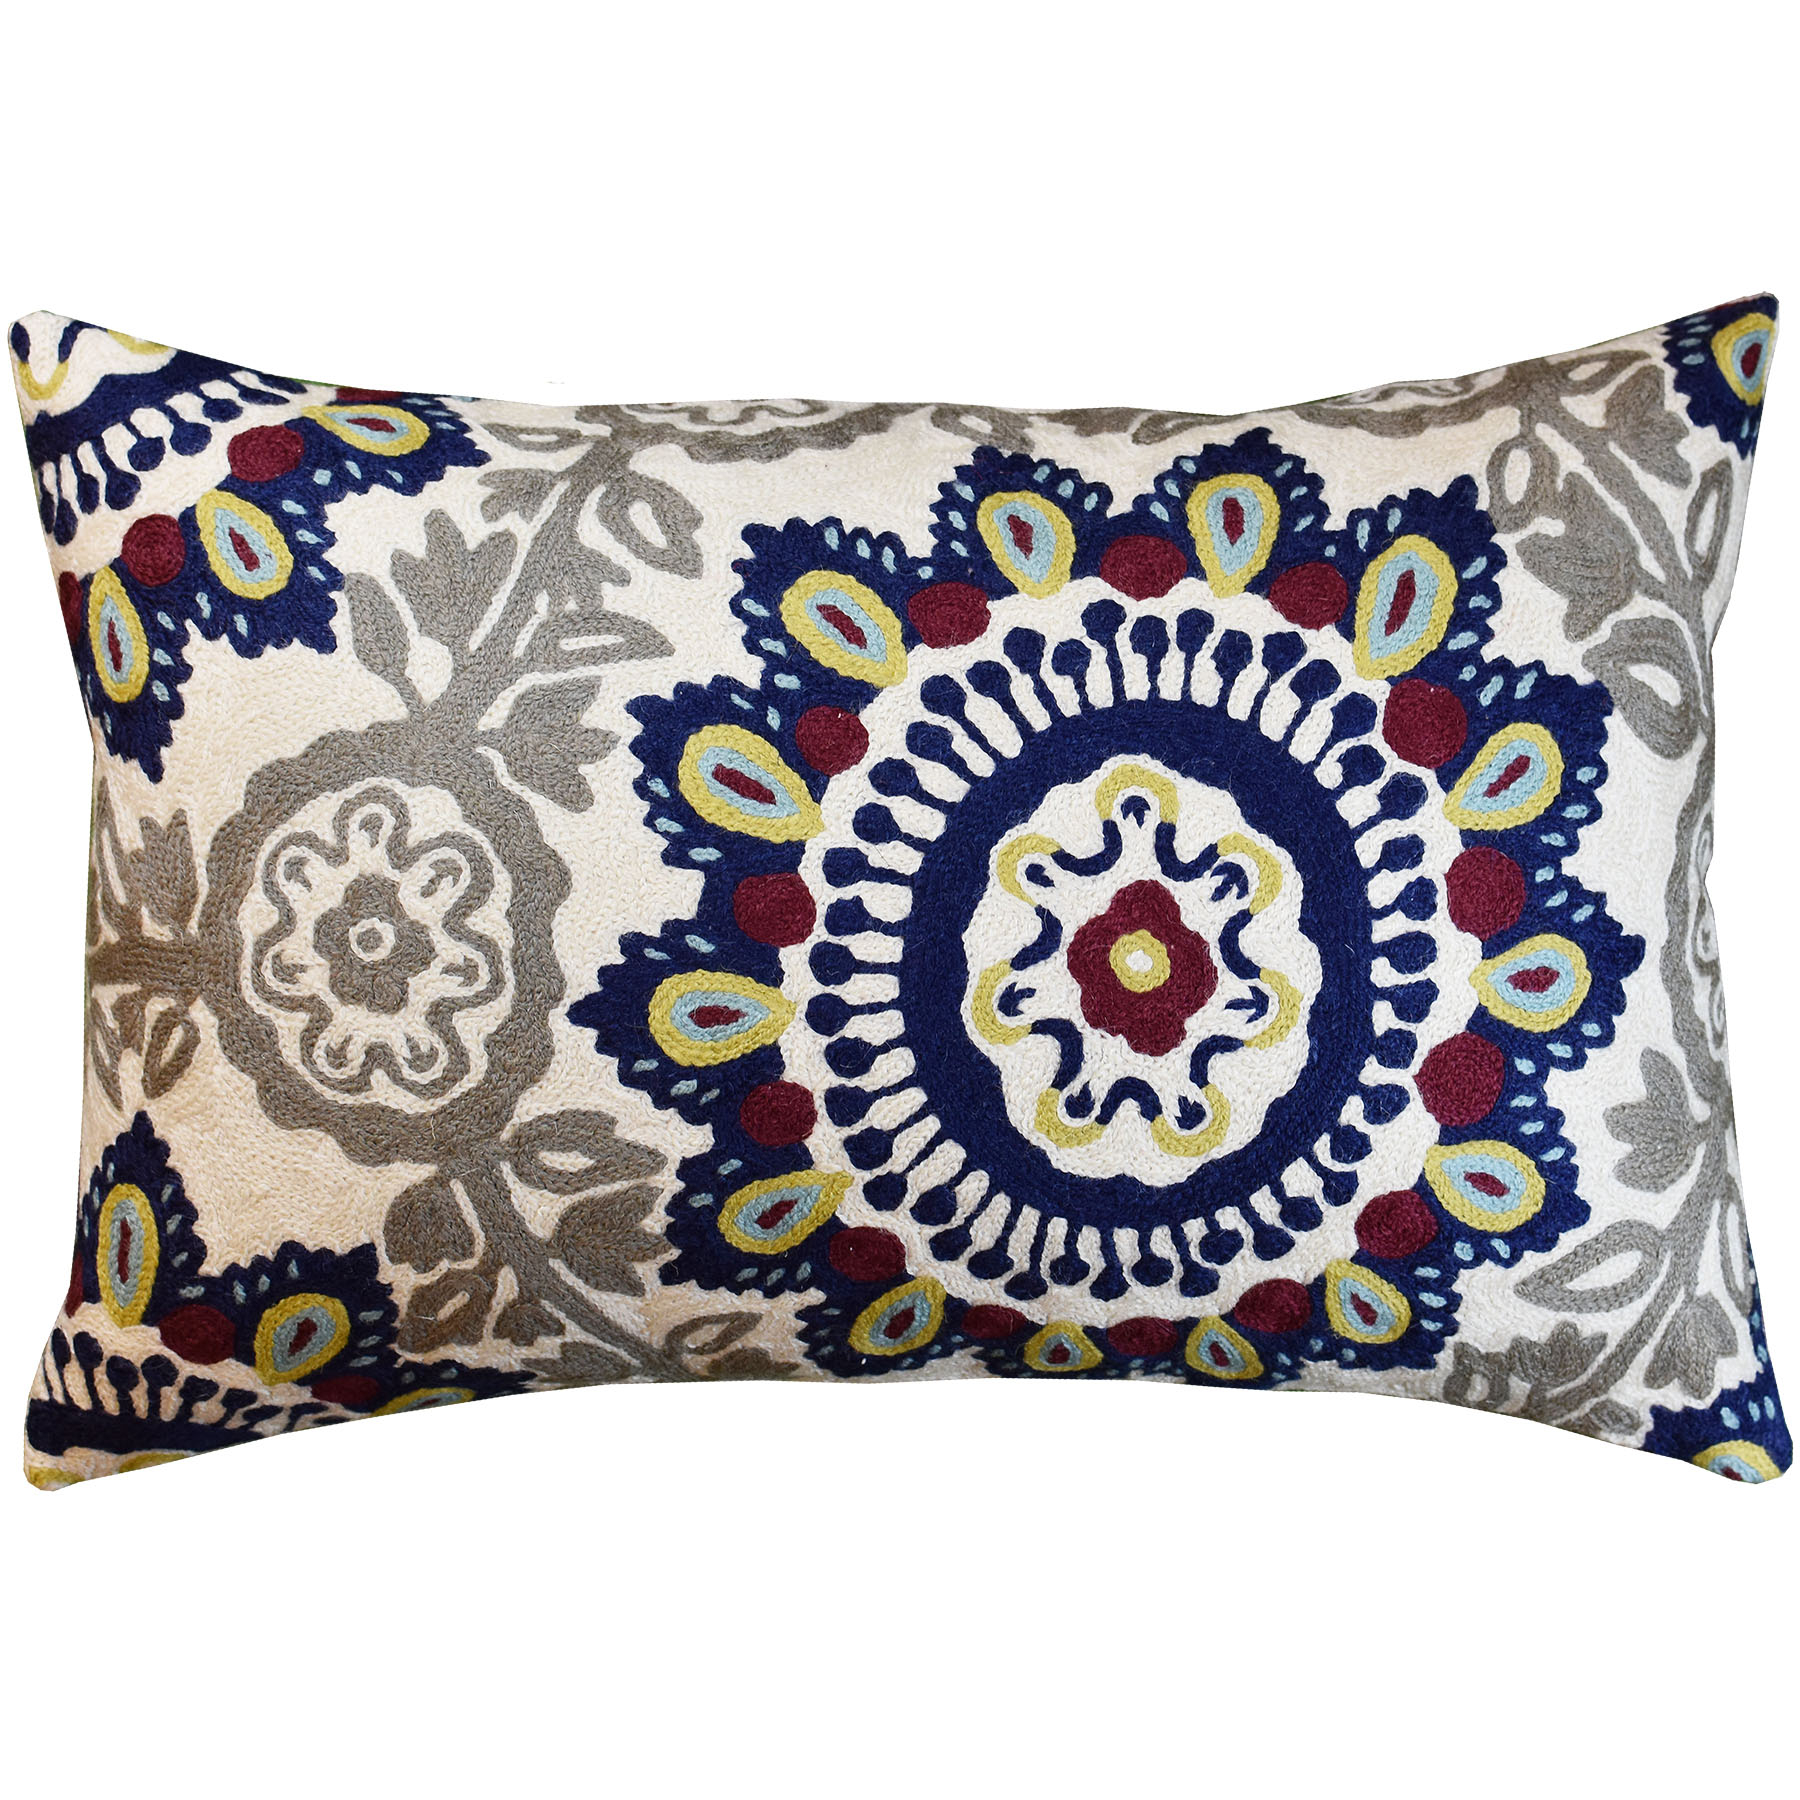 Hand Embroidery Patterns For Pillowcases Embroidered Floral Pillows Archives Kashmir Fine Arts